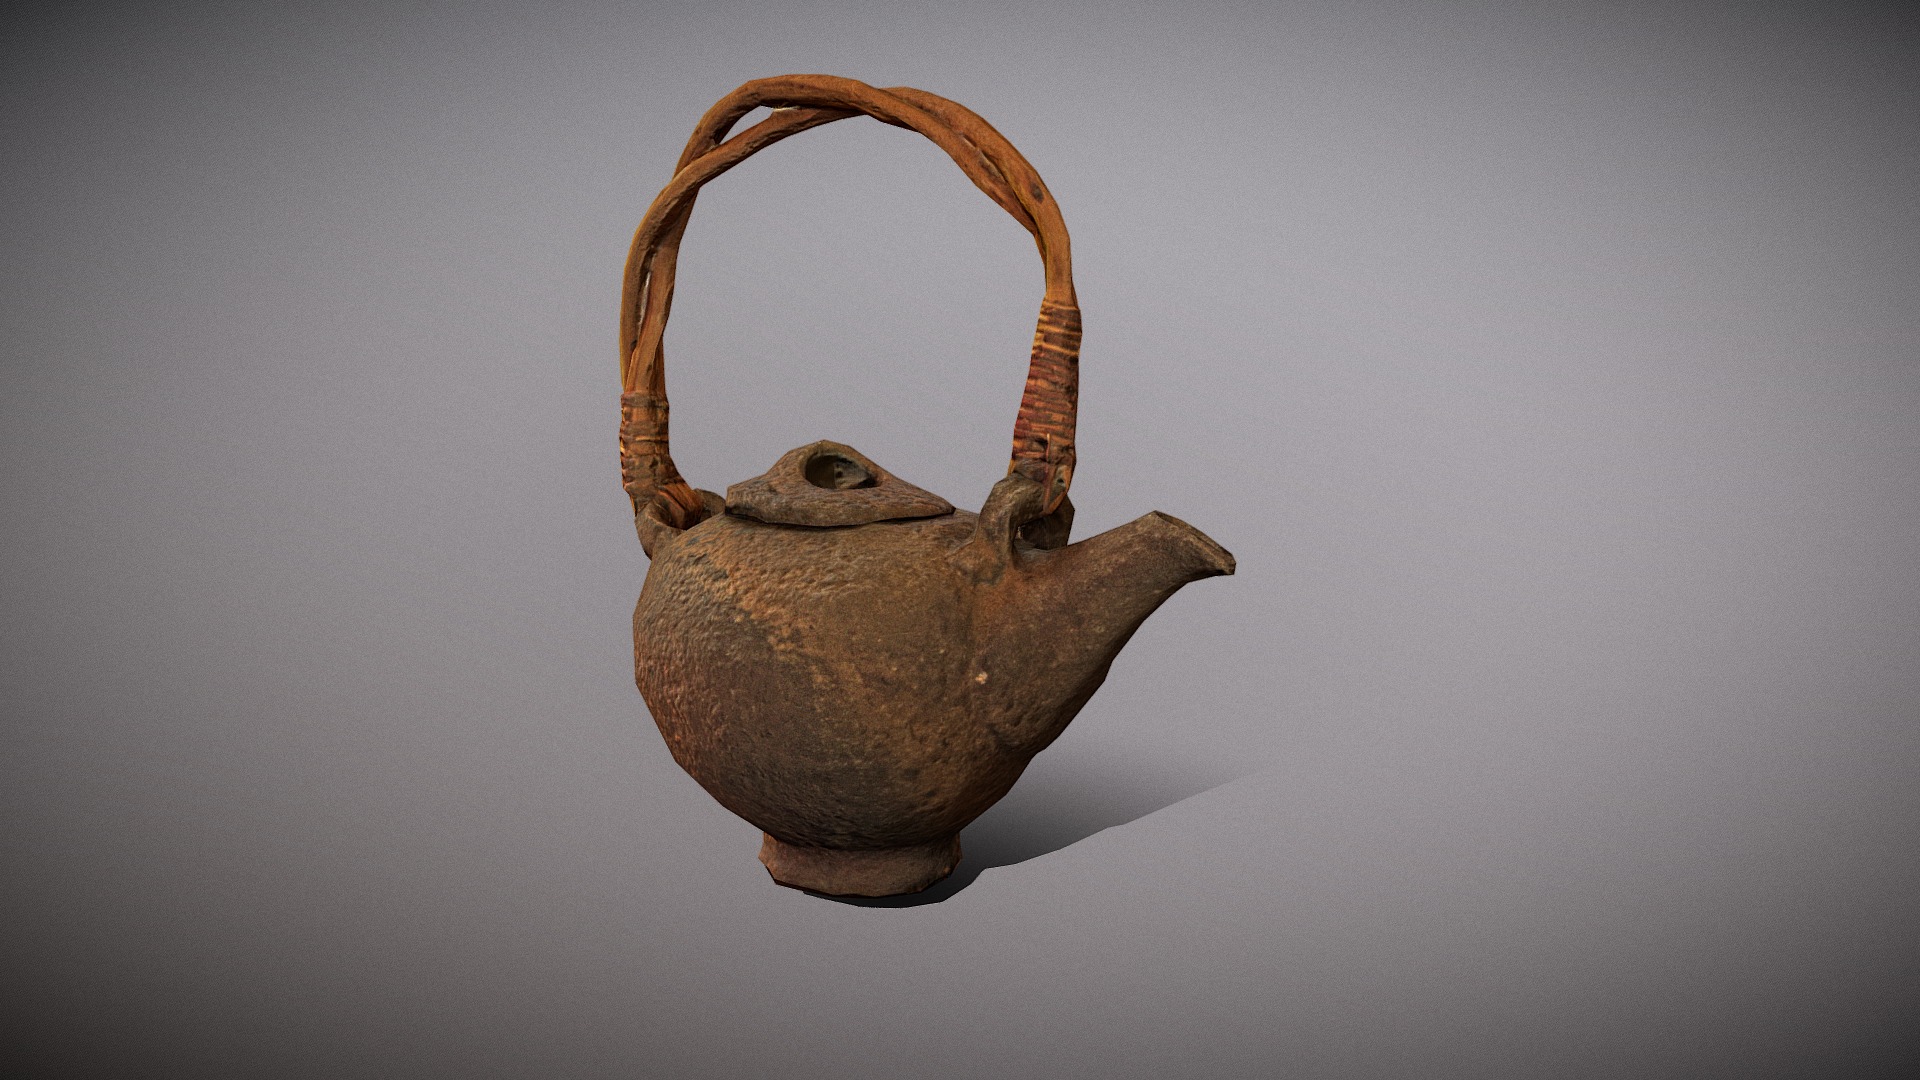 3D model Photorealistic hand made Tea Pot -japanese style - This is a 3D model of the Photorealistic hand made Tea Pot -japanese style. The 3D model is about a ceramic teapot with a handle.